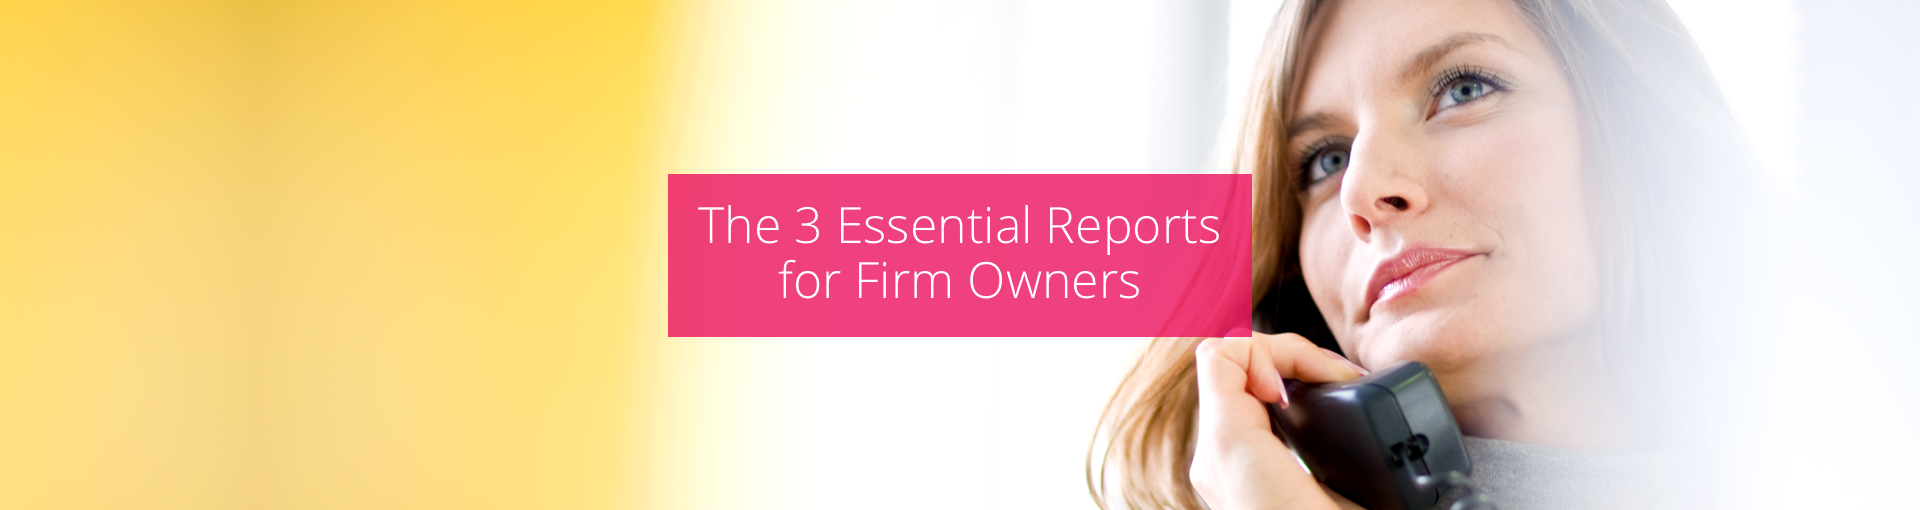 The 3 Essential Reports for Firm Owners Featured Image